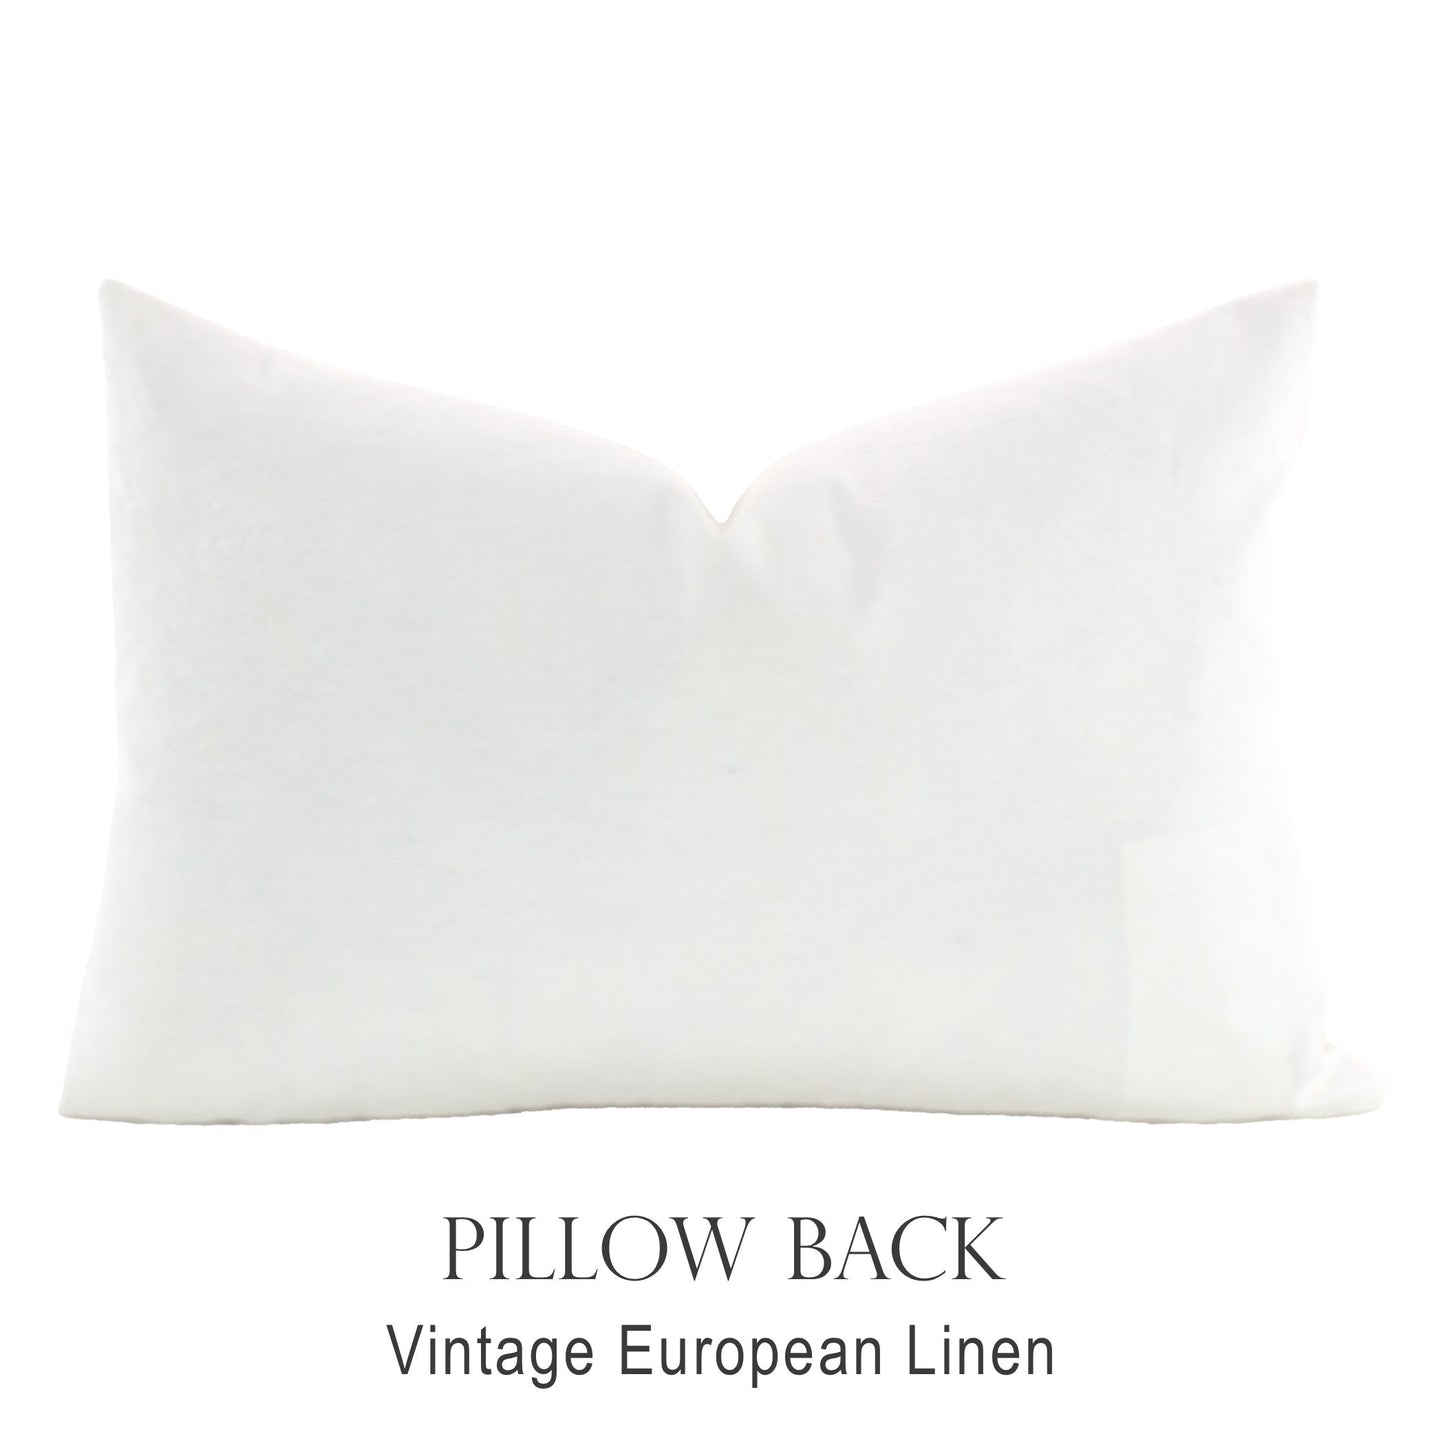 Back of pillow made from vintage German white linen